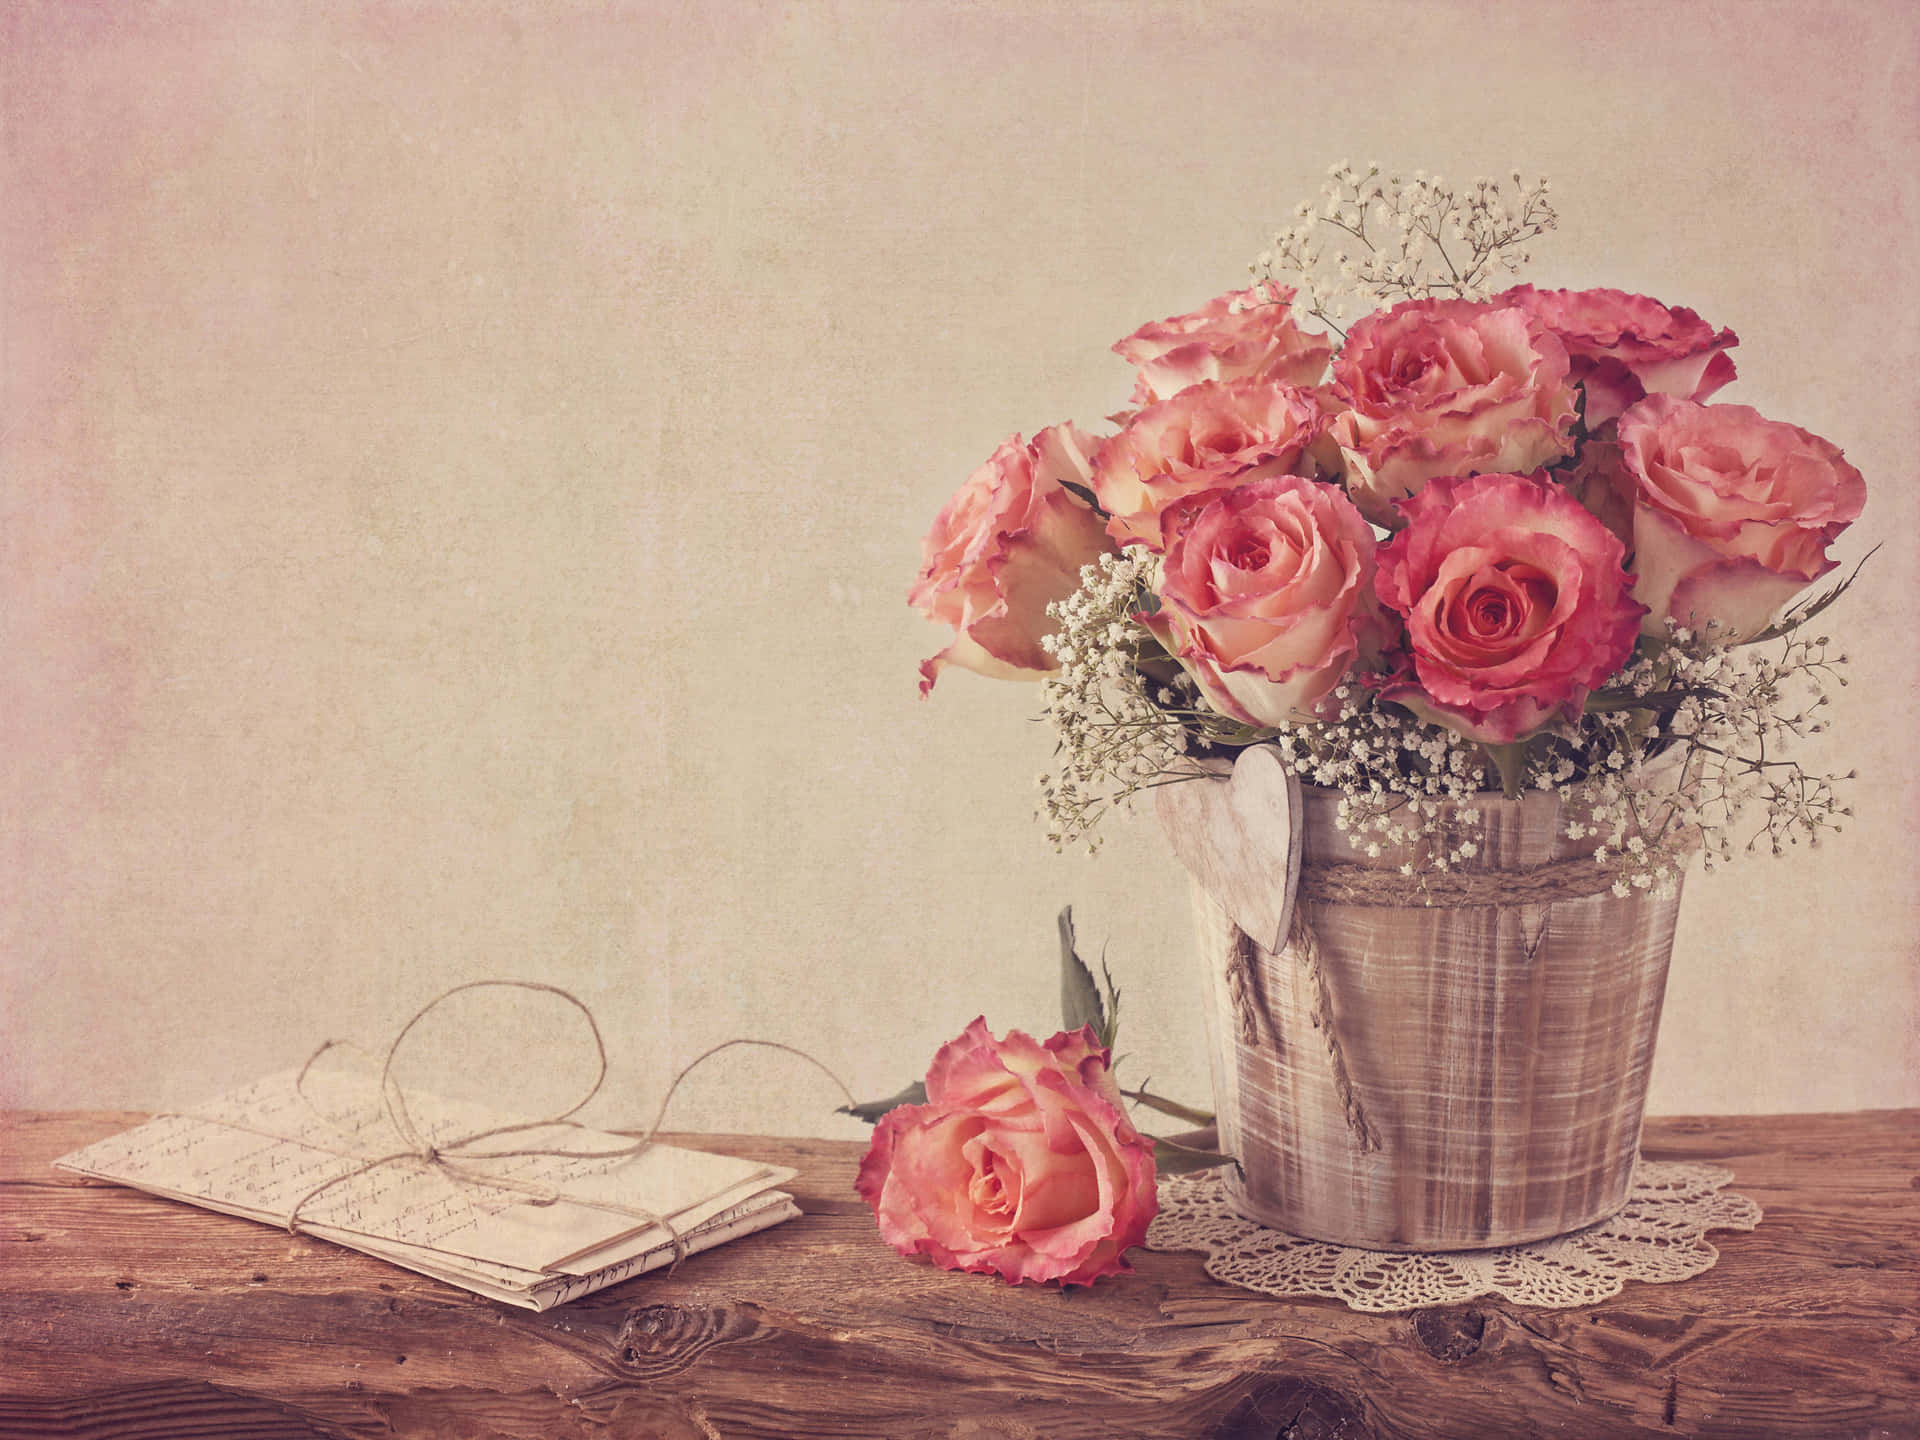 Vintage Roses In A Vase On A Wooden Table